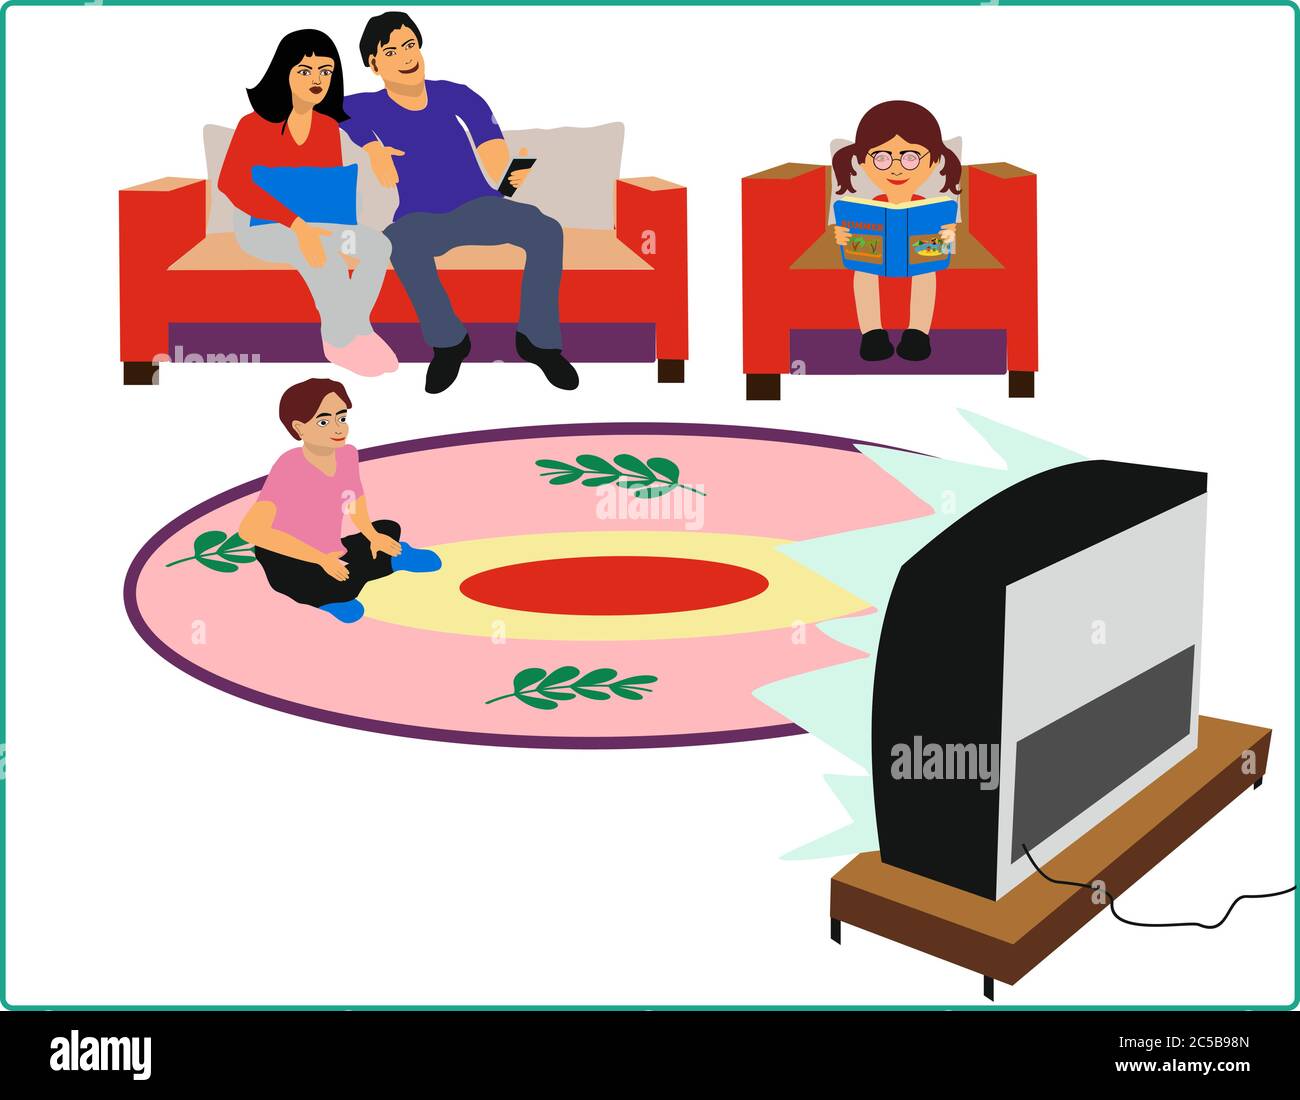 Stay at home. Protect yourself. Quarantine During Coronavirus Outbreak. Activity at home.Vector Illustration Stock Vector